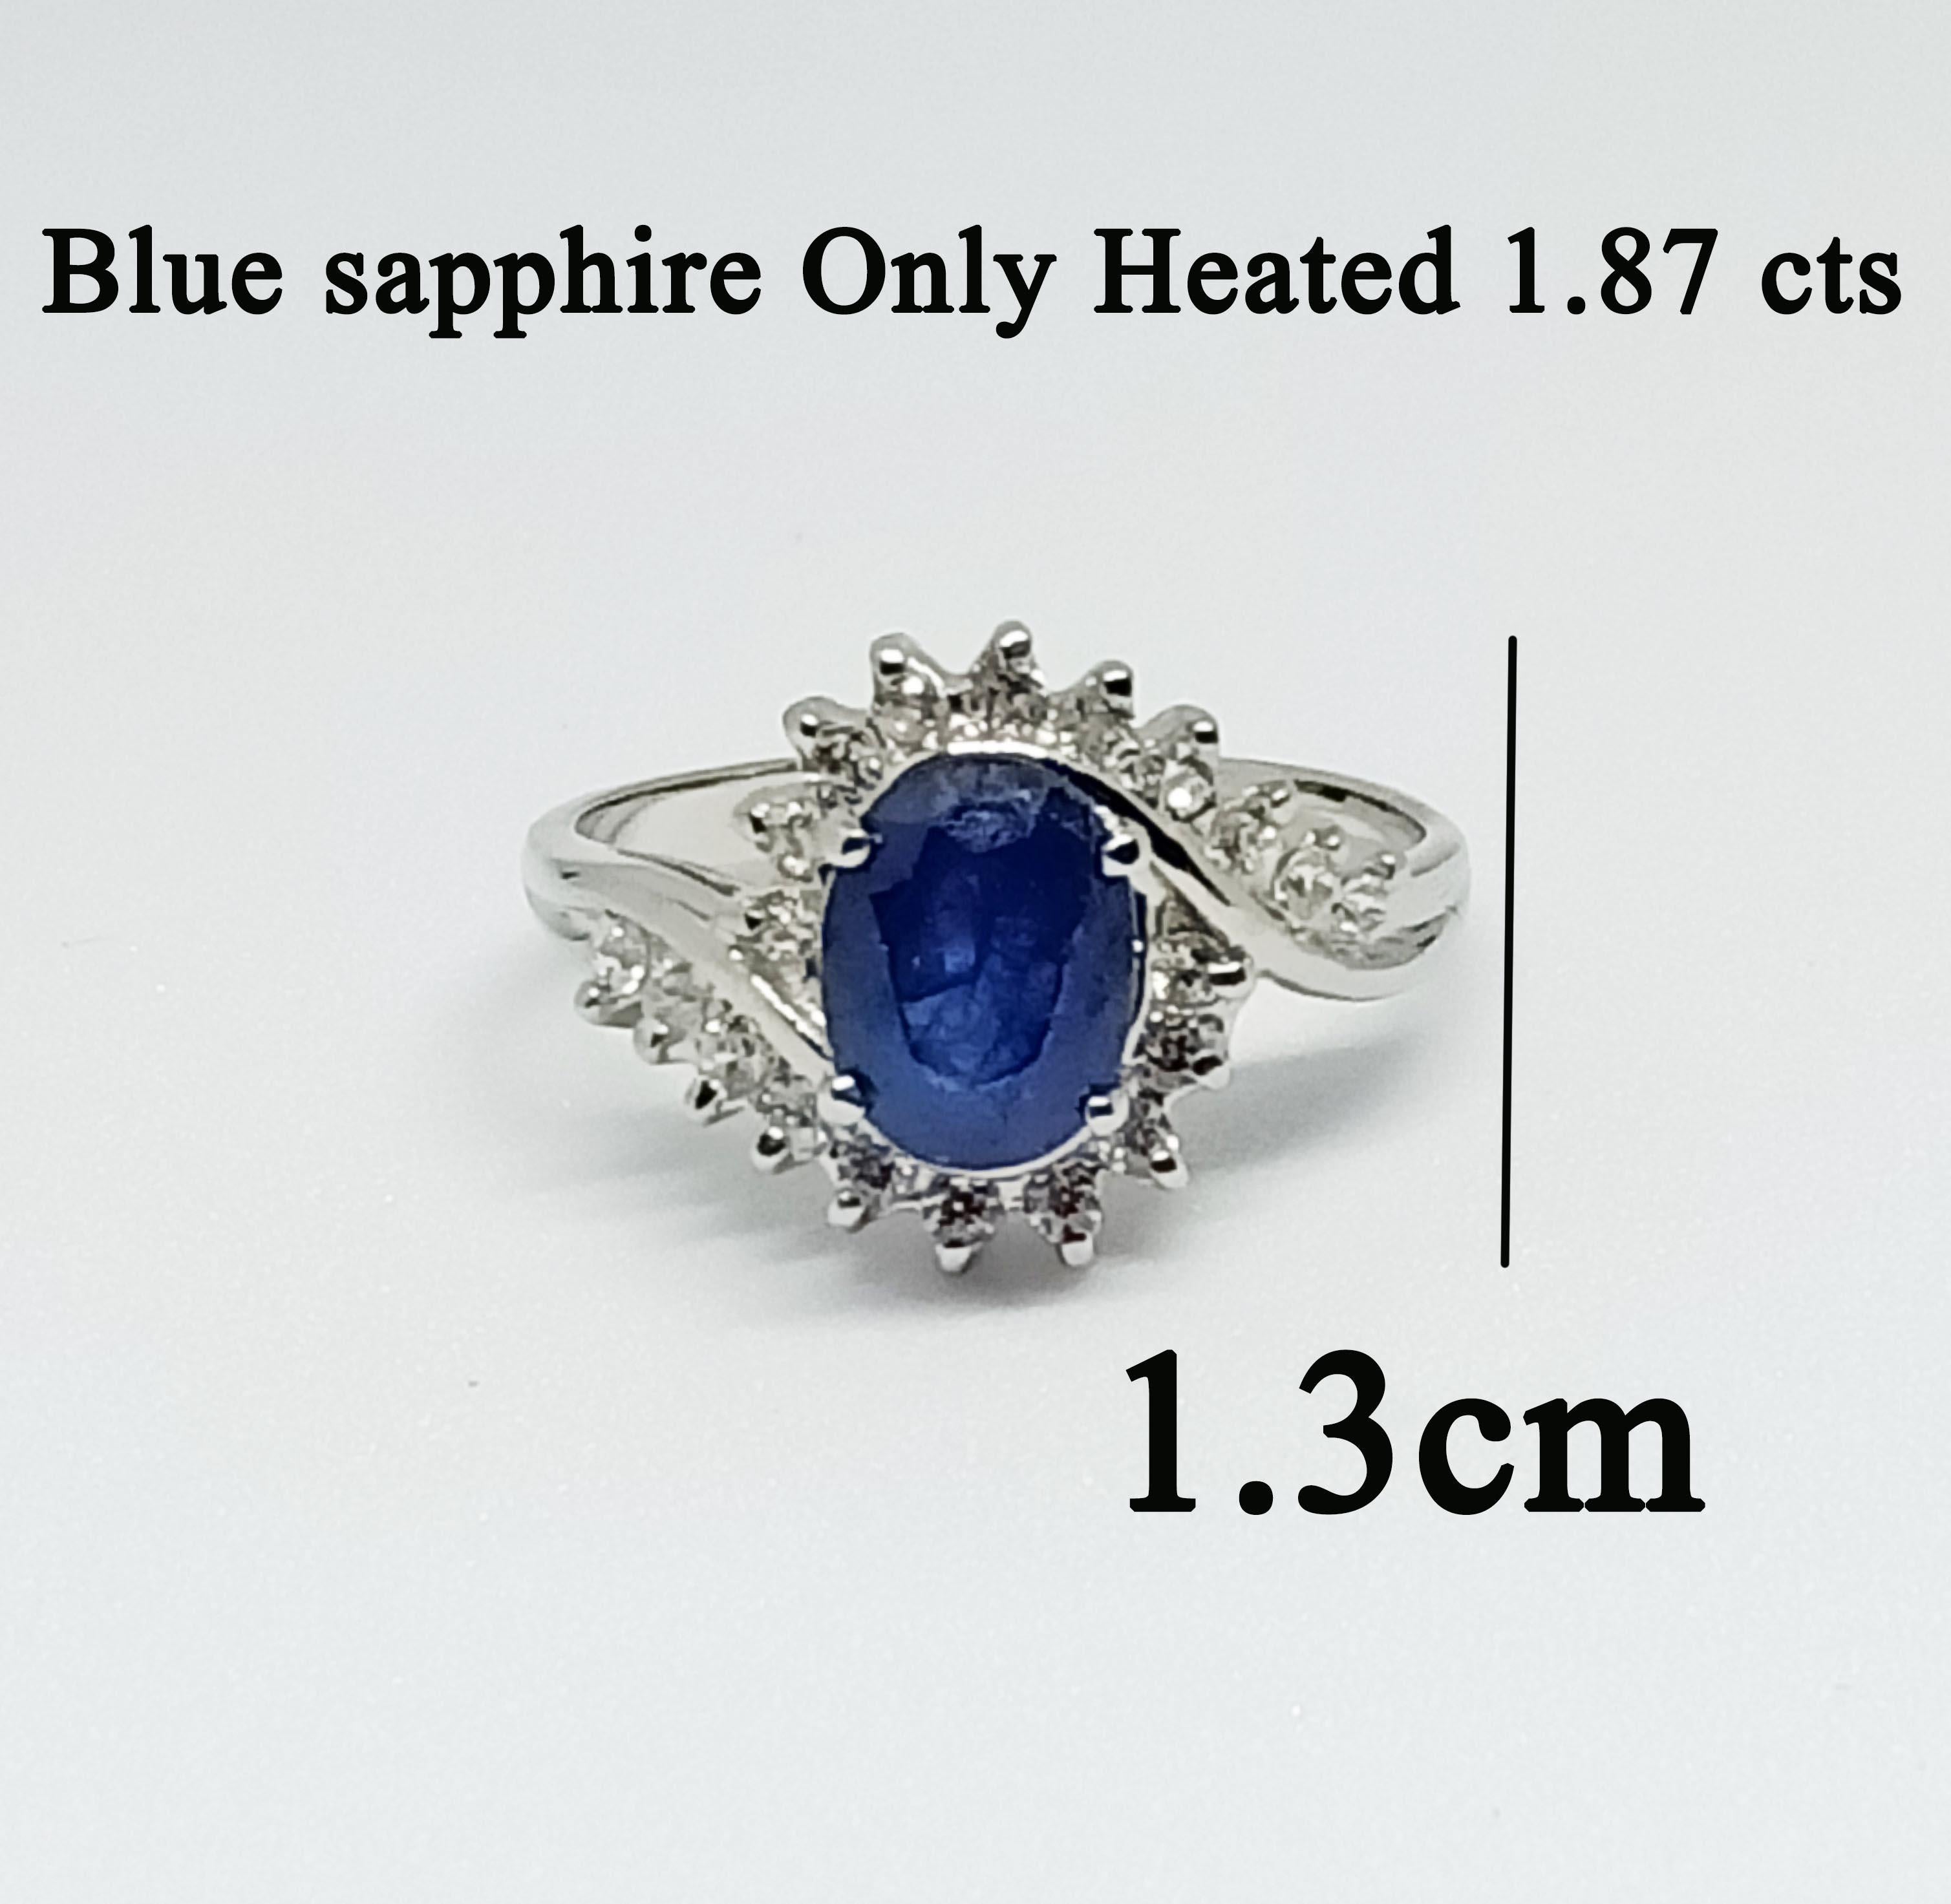 Blue sapphire 1.87cts Only Heated oval 8x6 mm. 
White zircon round 1.50 mm. 18 pcs
White Gold Plated over Sterling Silver
Metal : Silver
